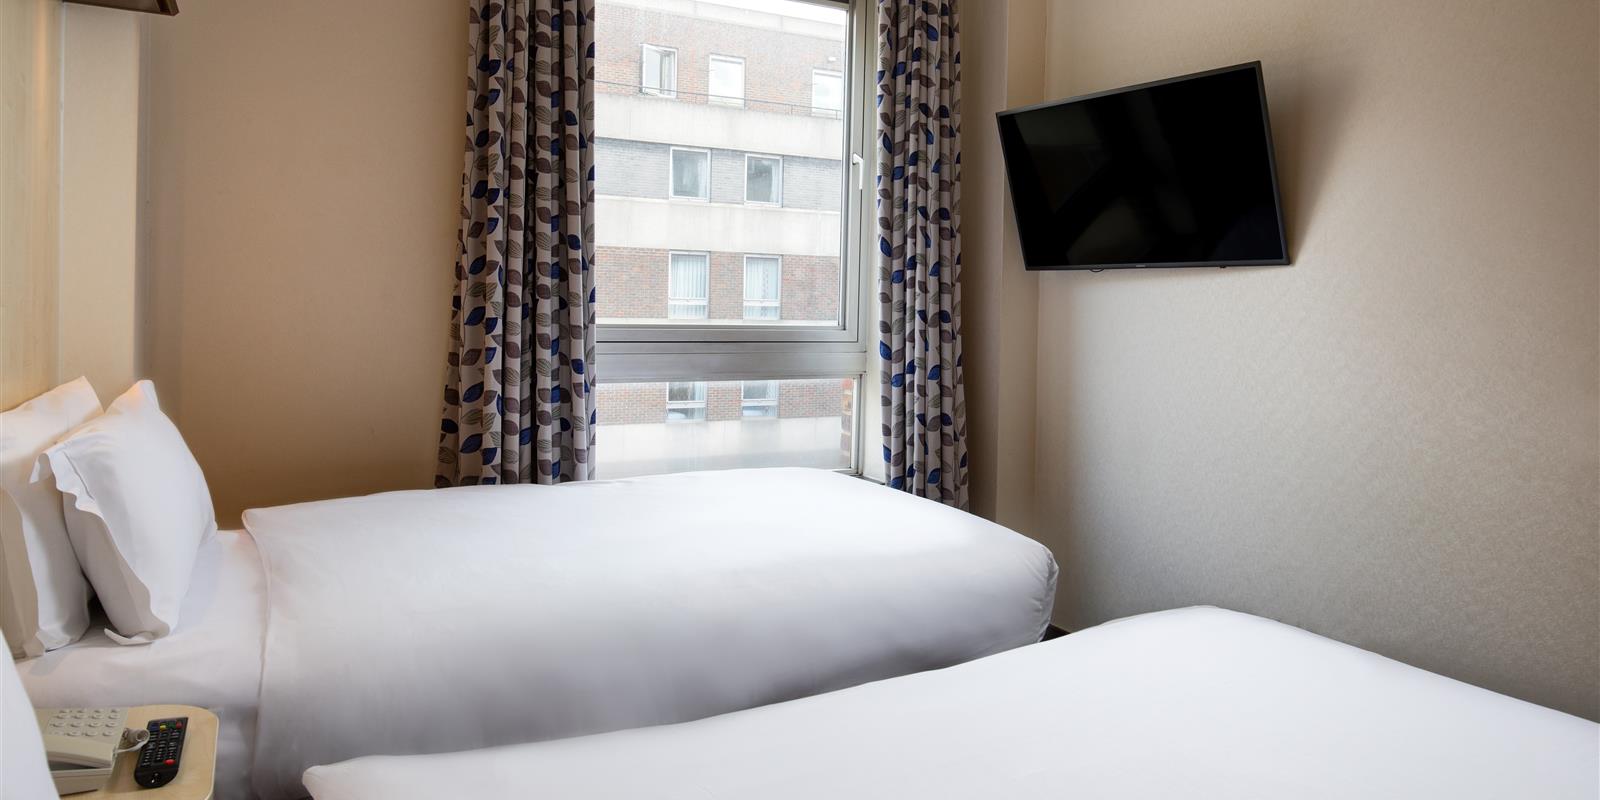 Royal National Standard Twin room in russell square london